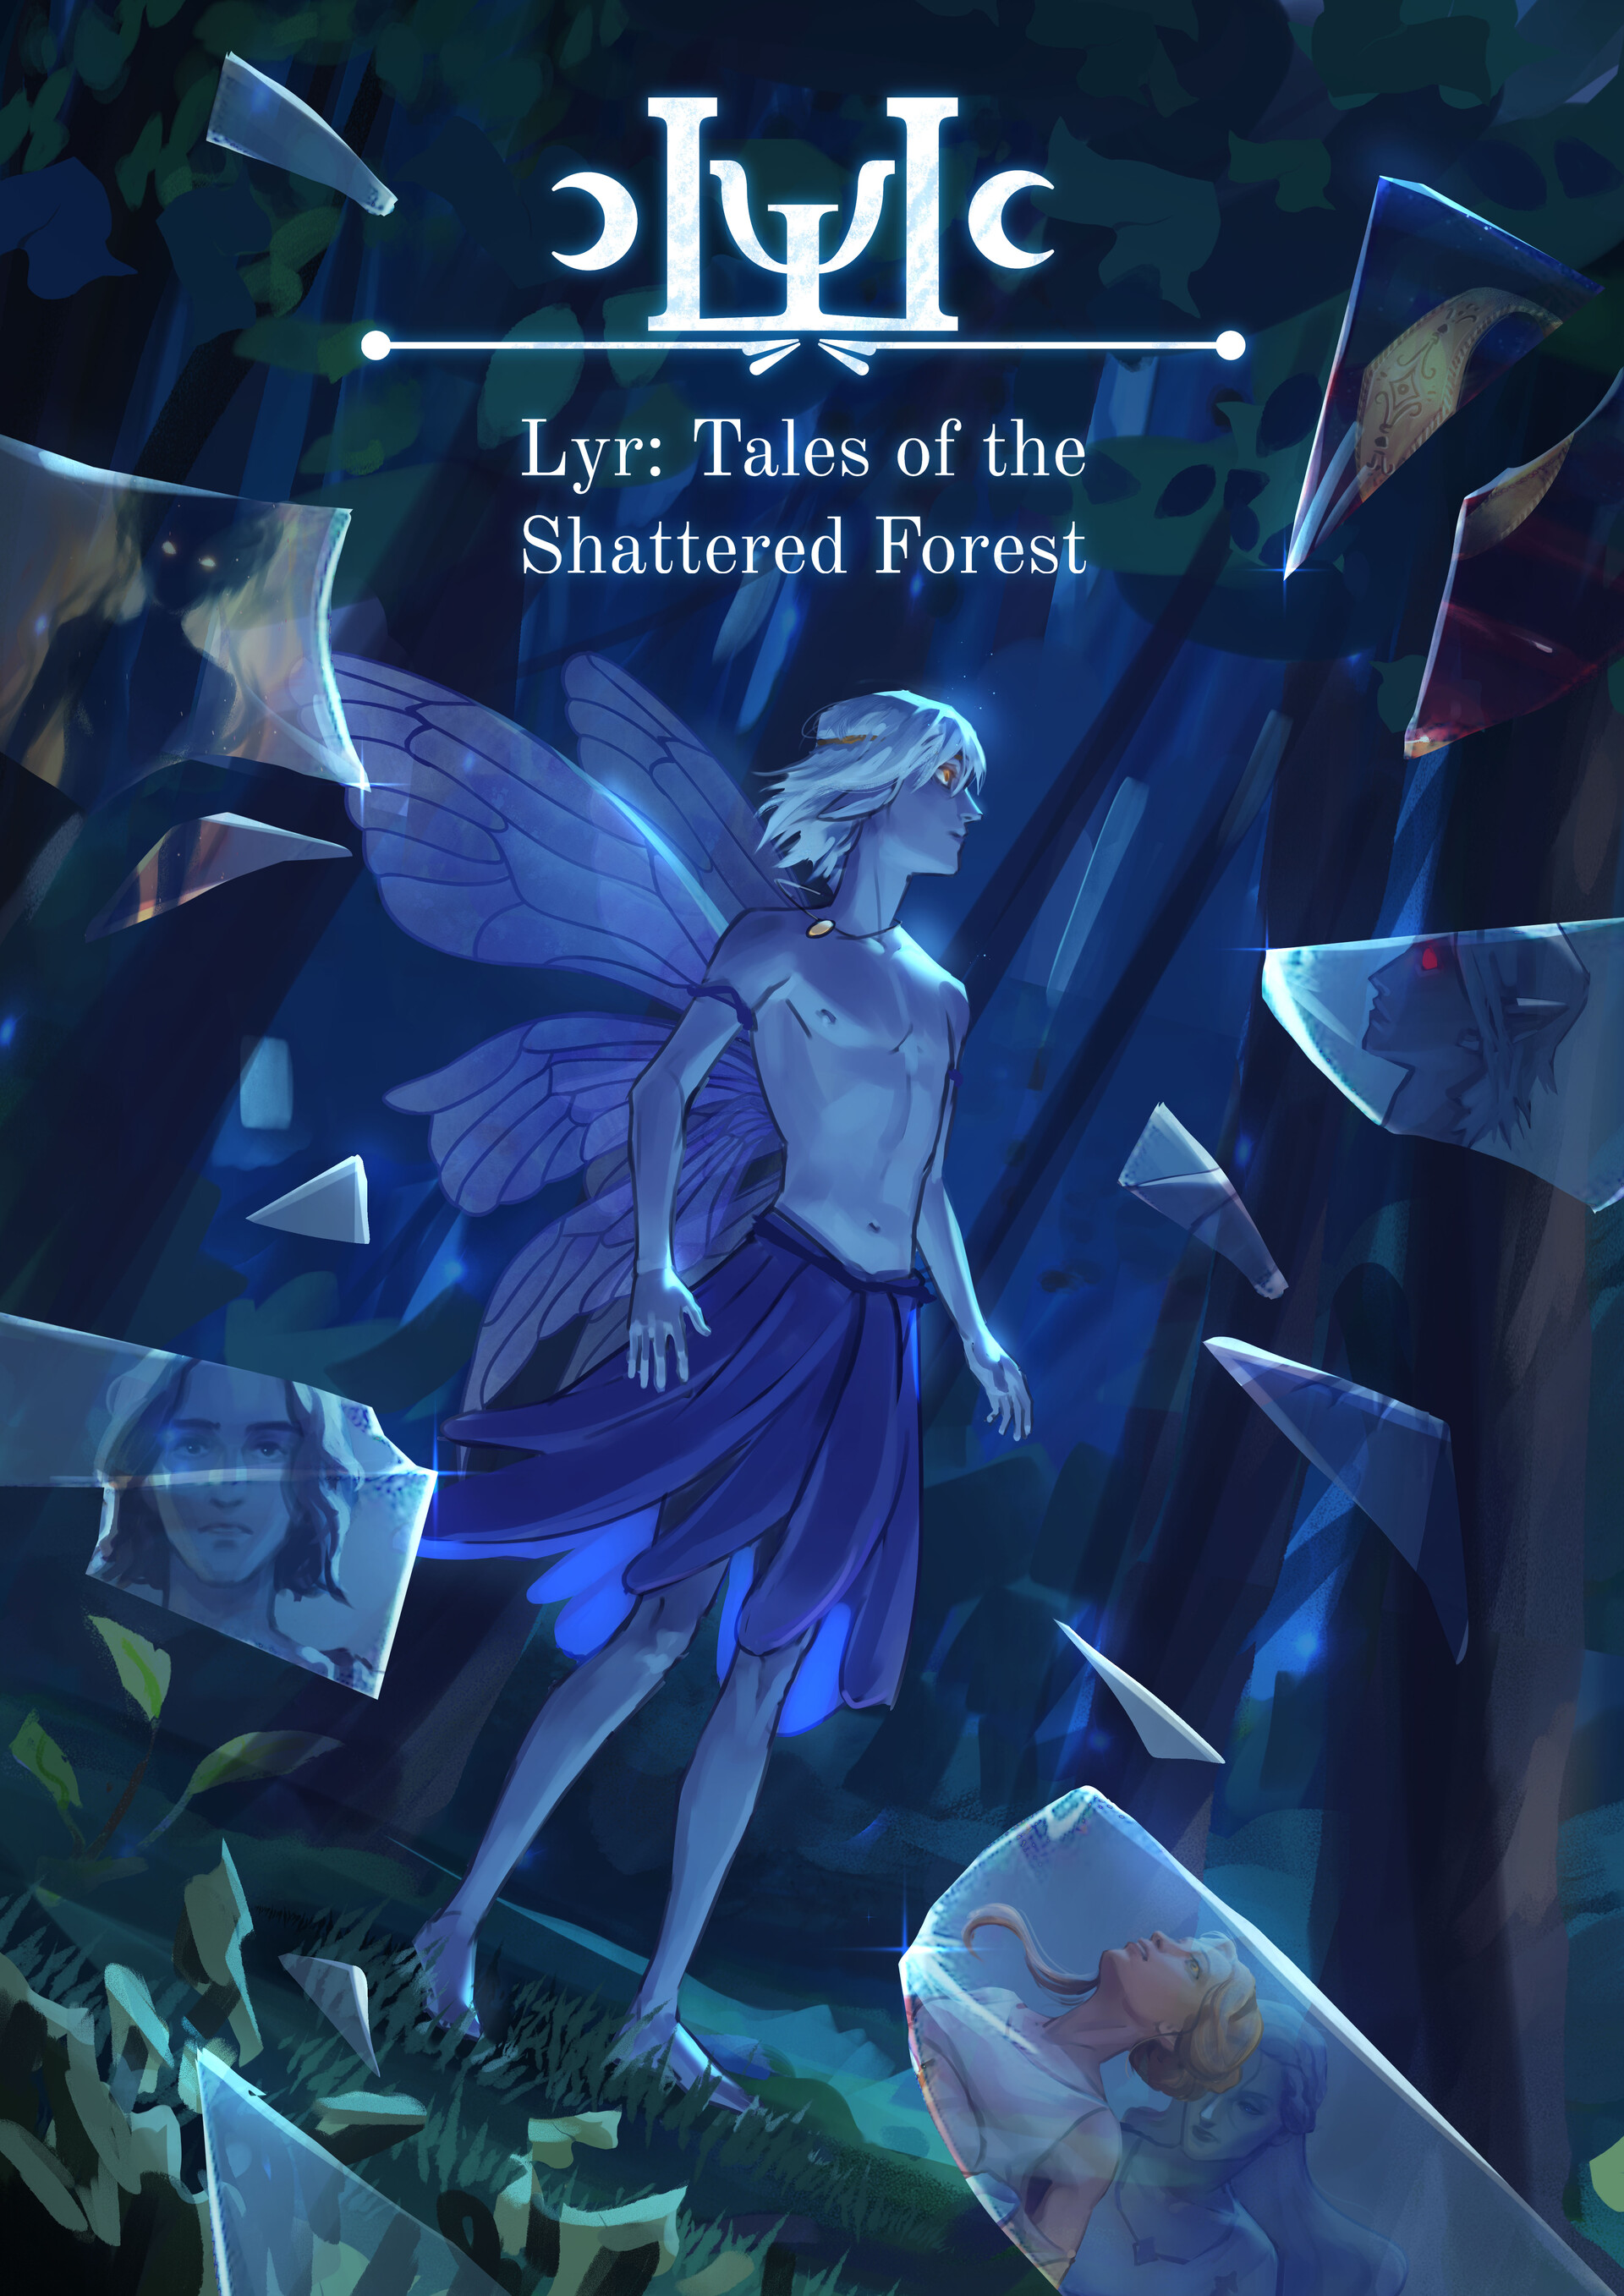 Tales of the Forest